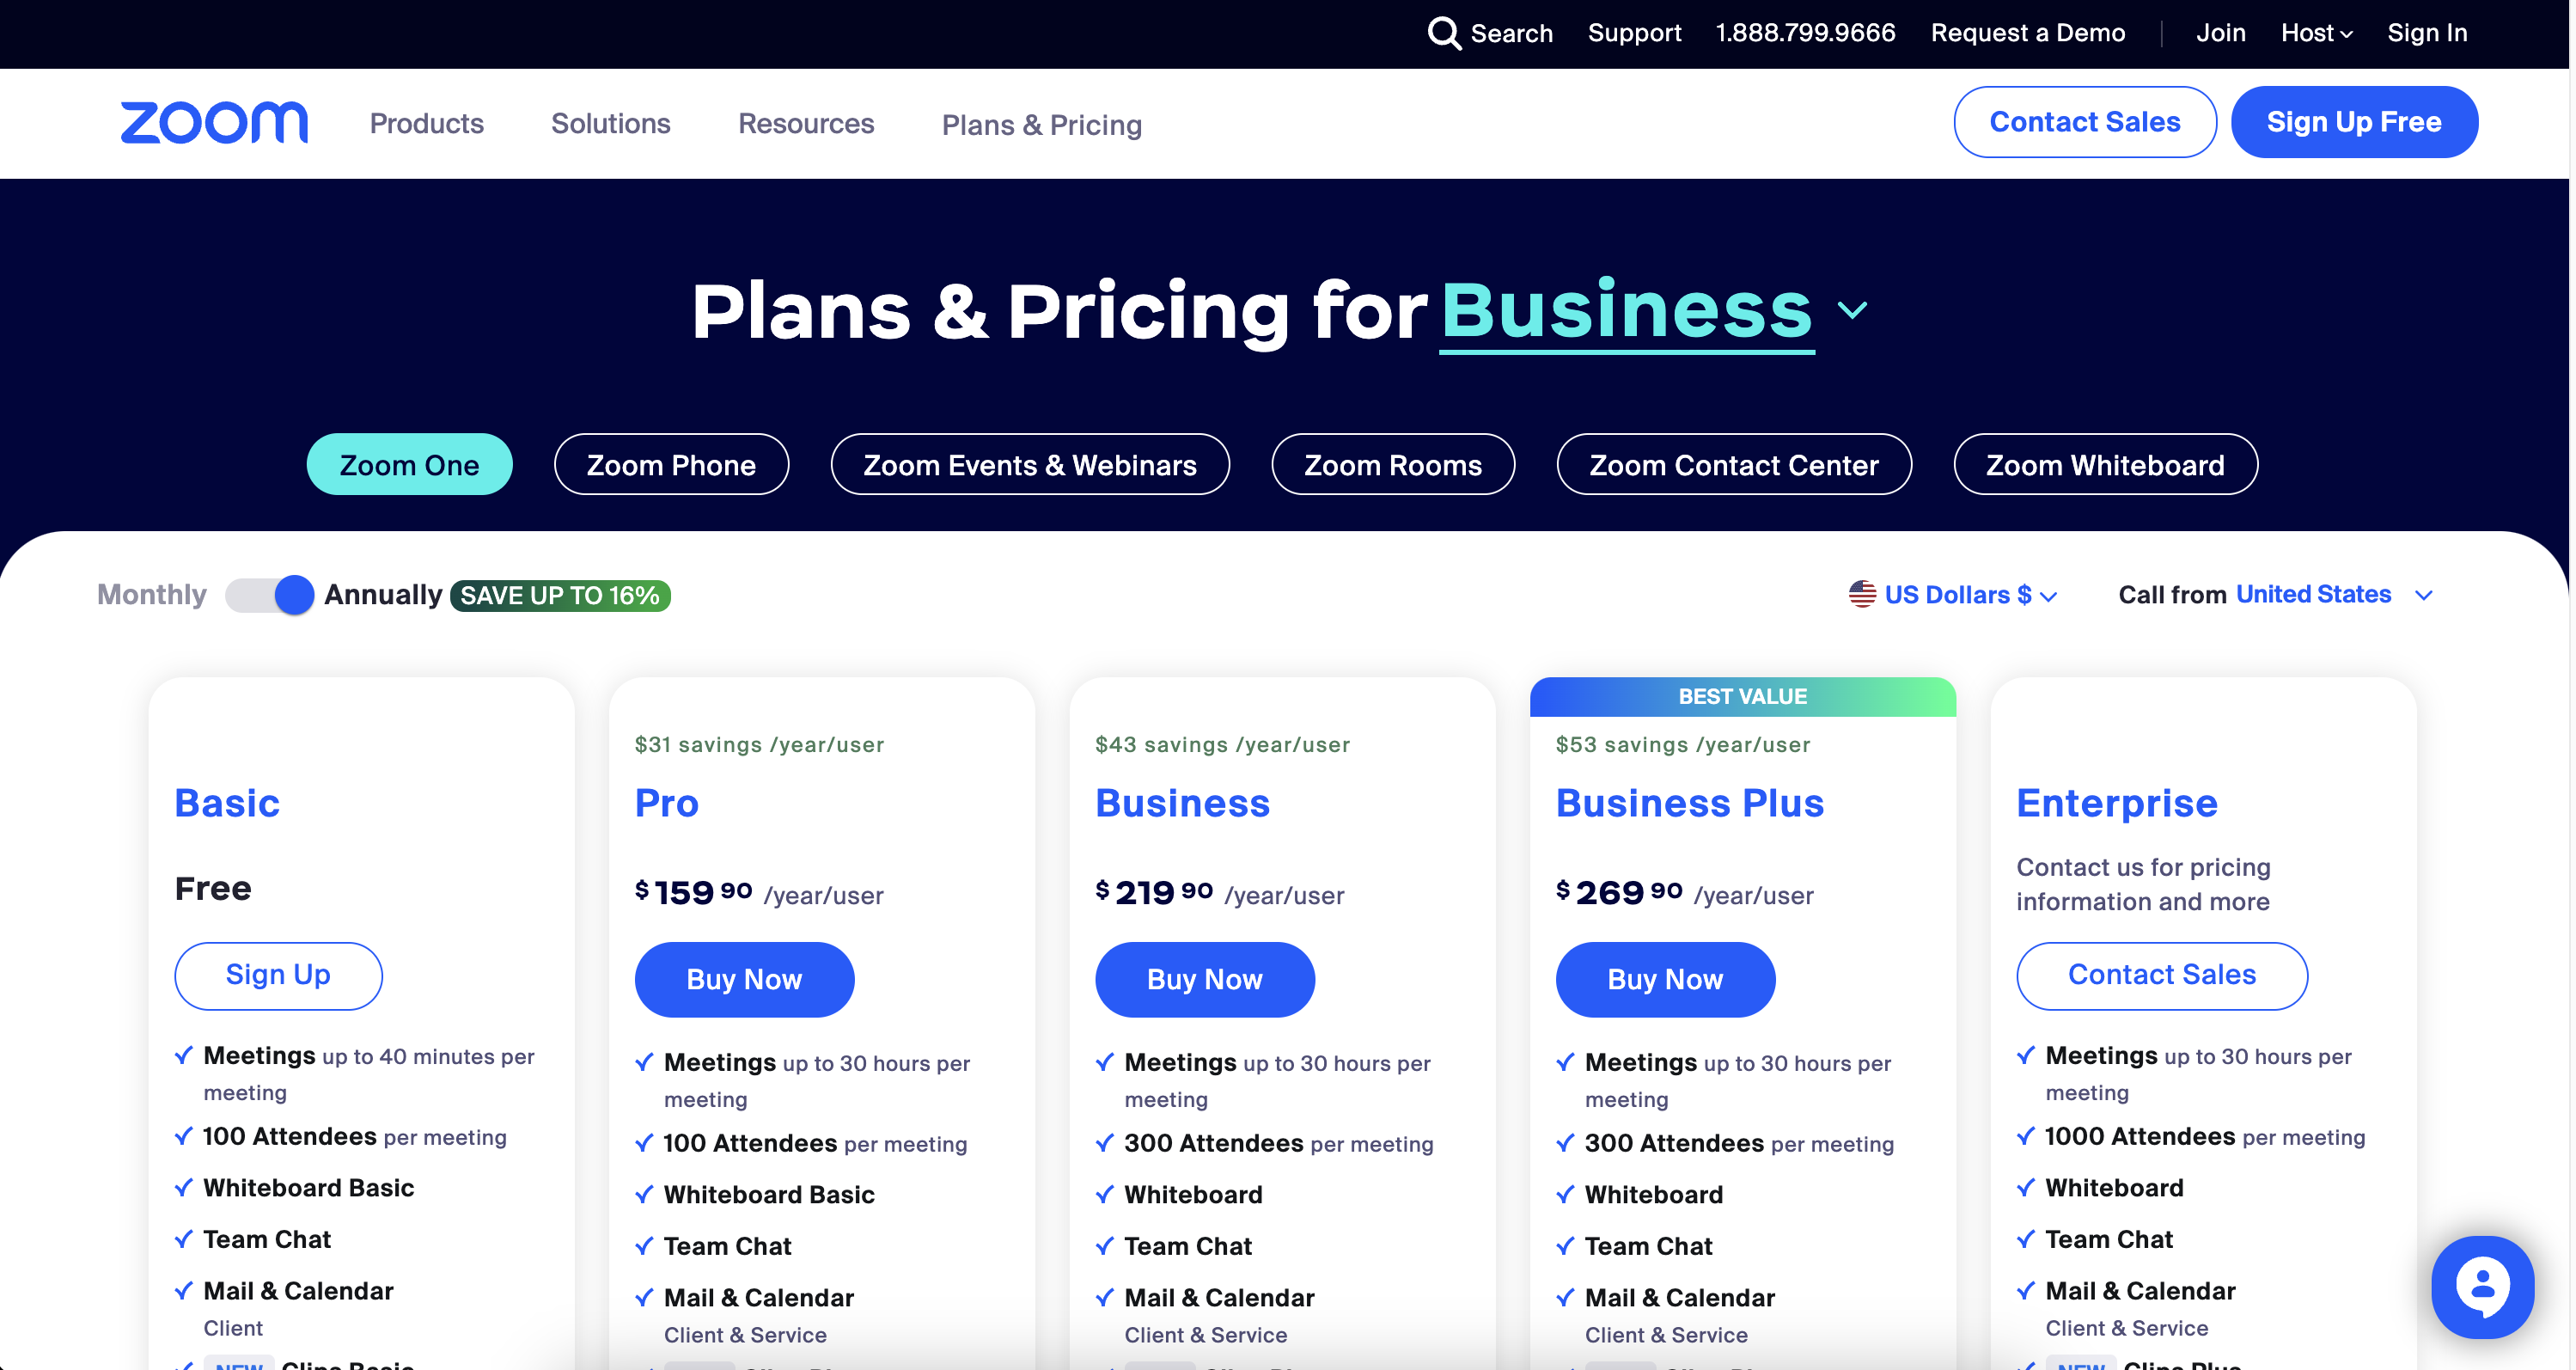 Analyze competitor's plans and pricing pages